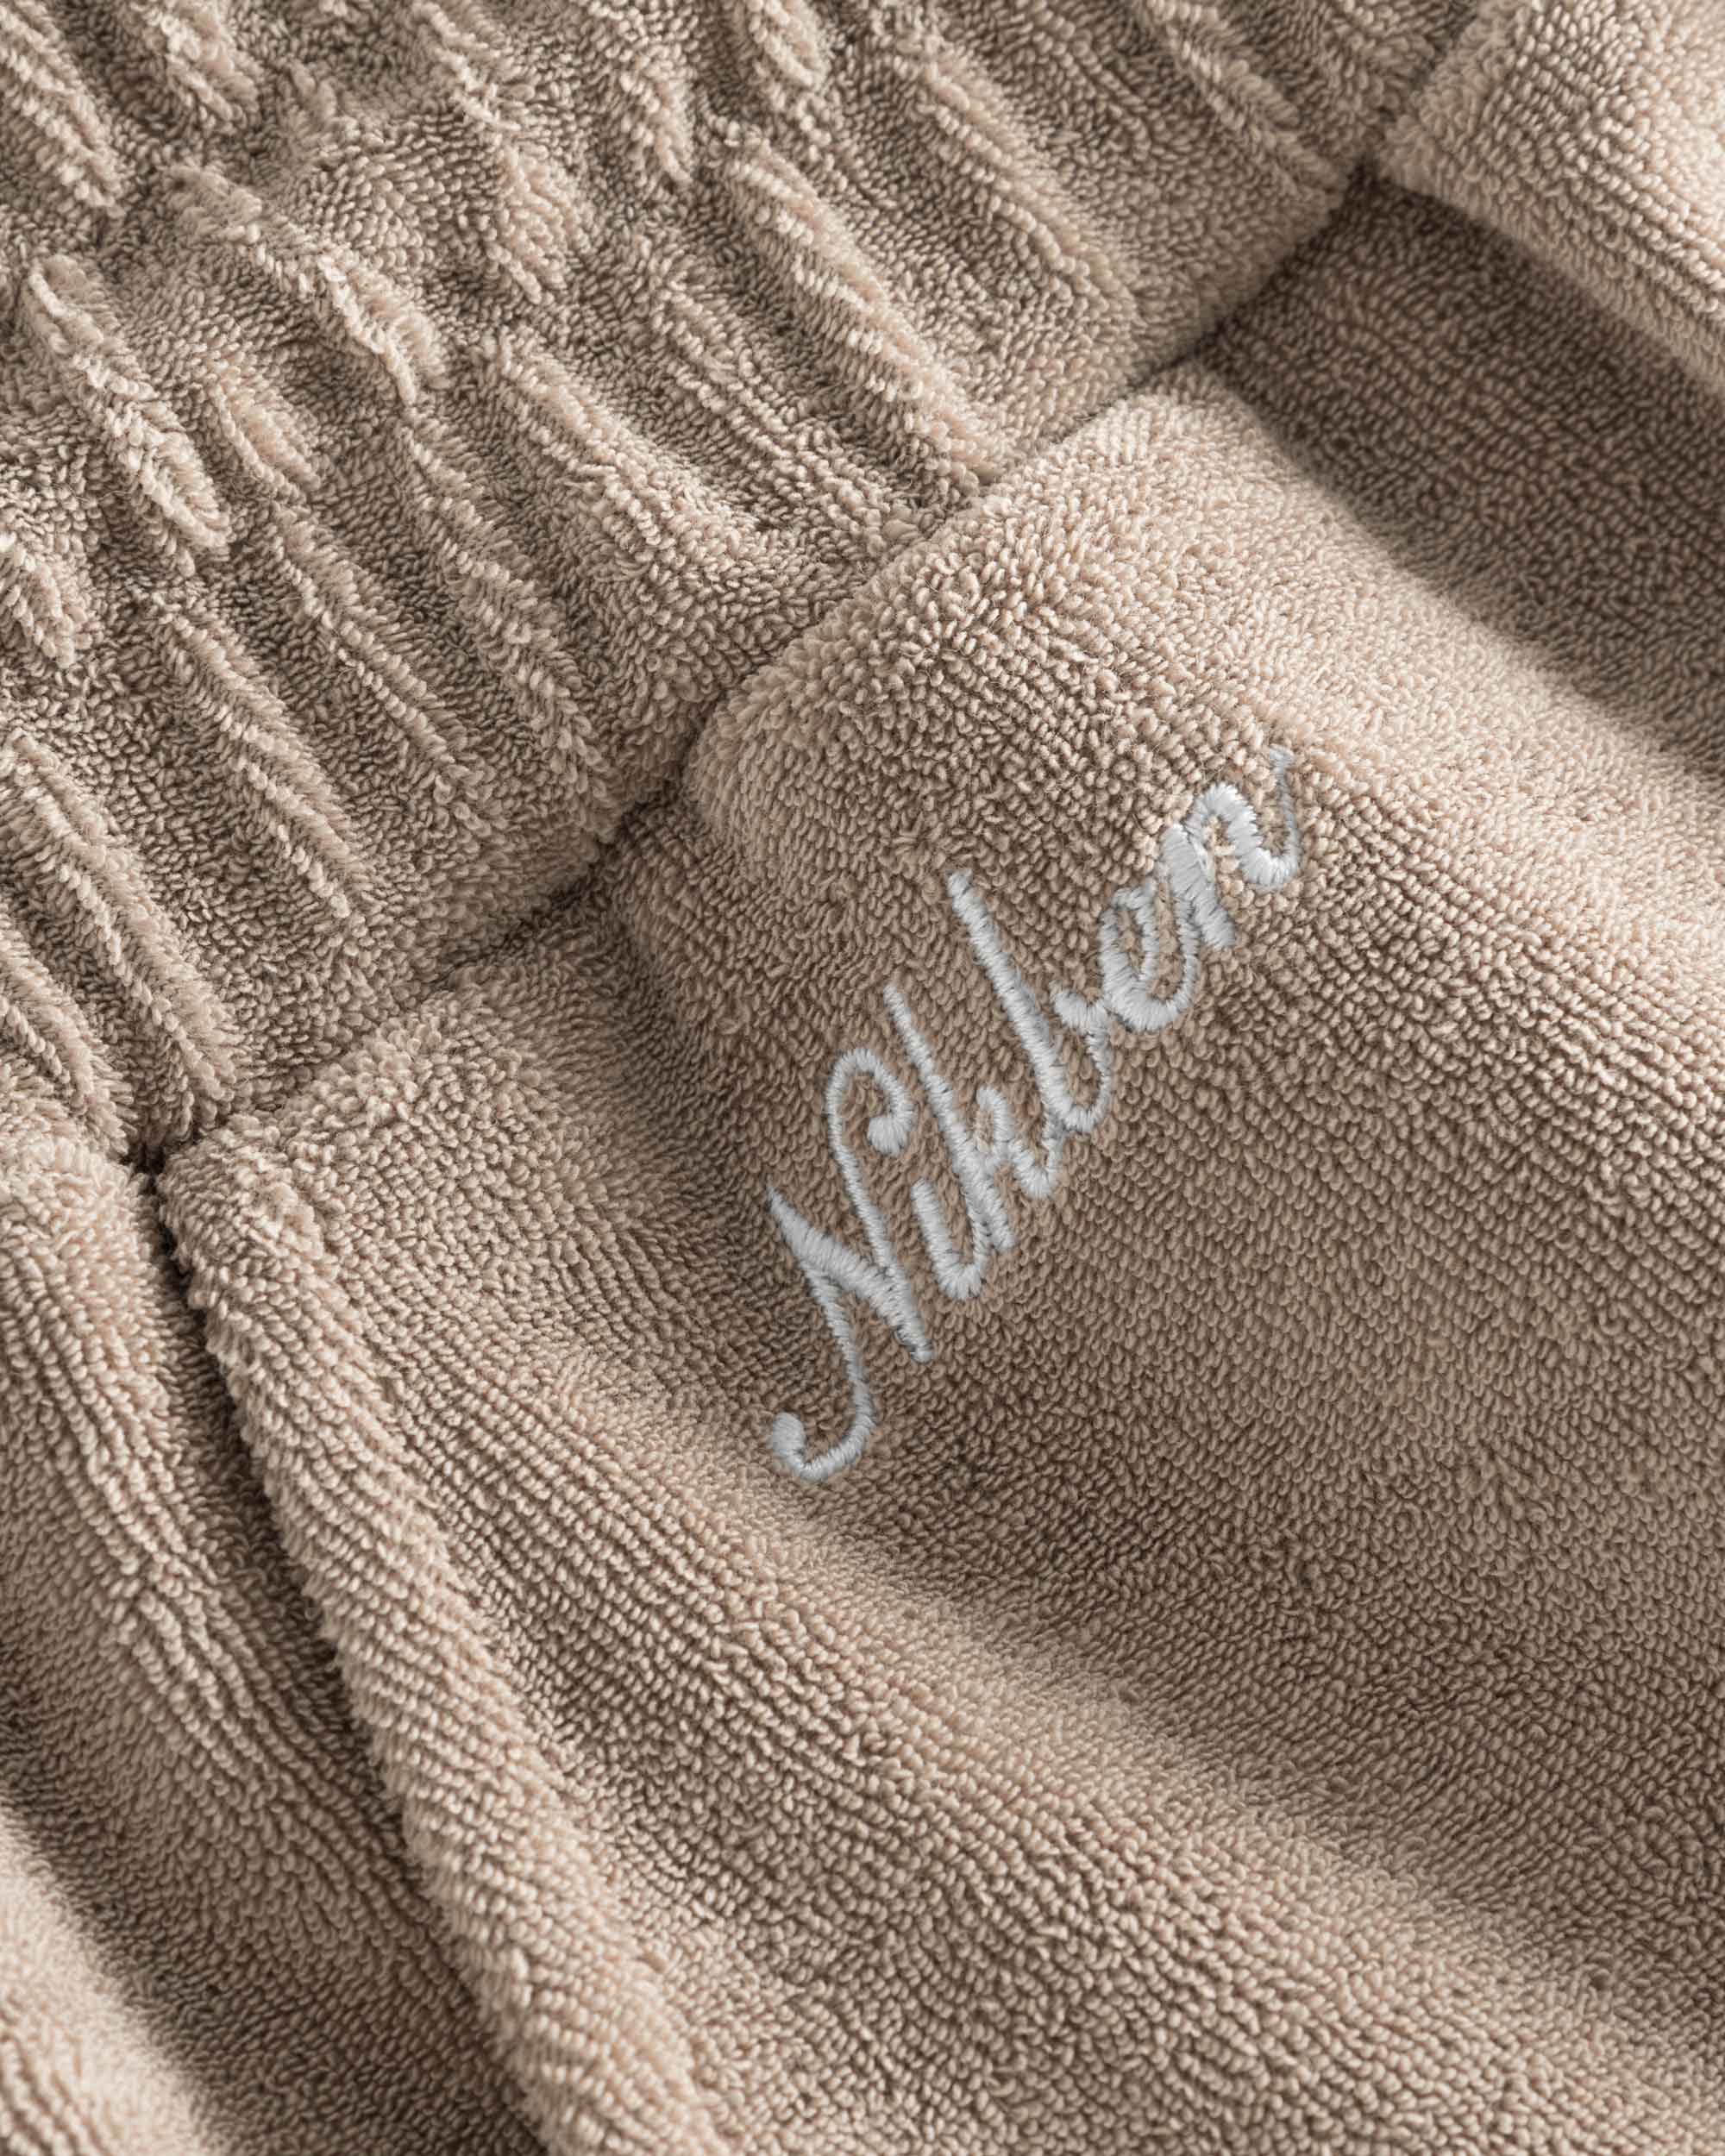 Close up of embroidered logo on light brown low cut shorts in terry toweling fabric